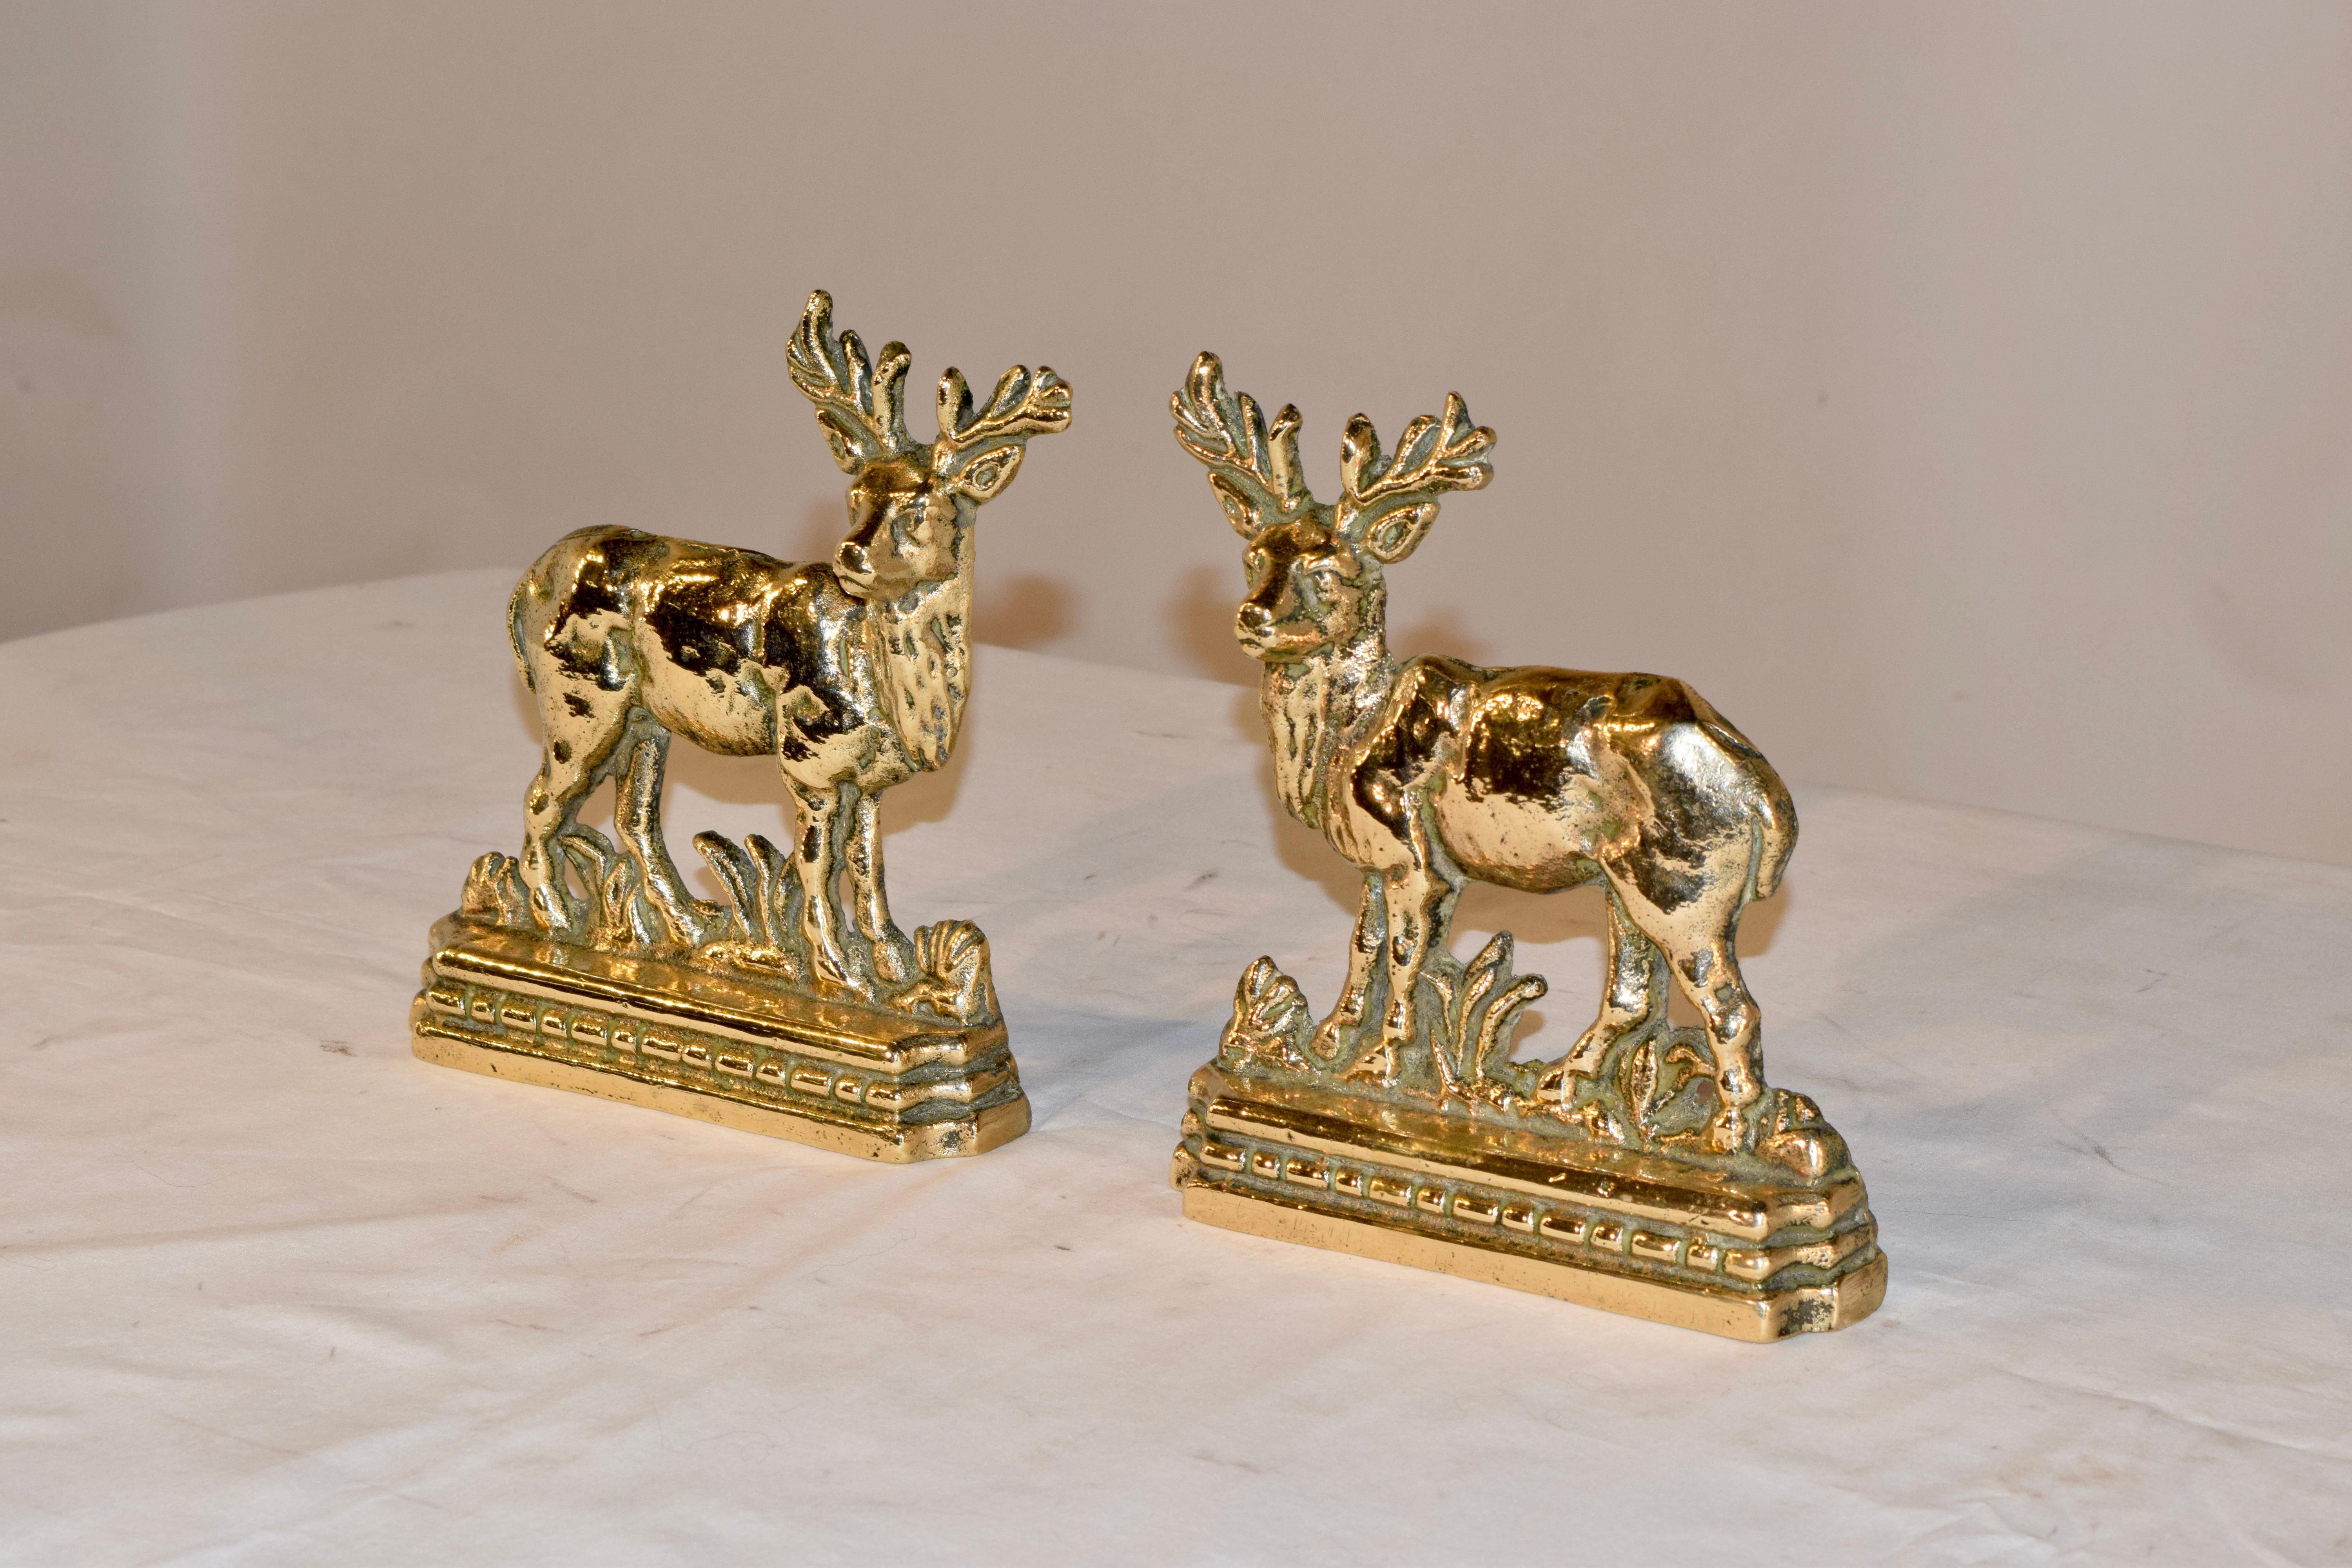 Pair of late 19th century English cast brass mantle decorations in the form of stags. They are beautifully cast with lovely detail and design.